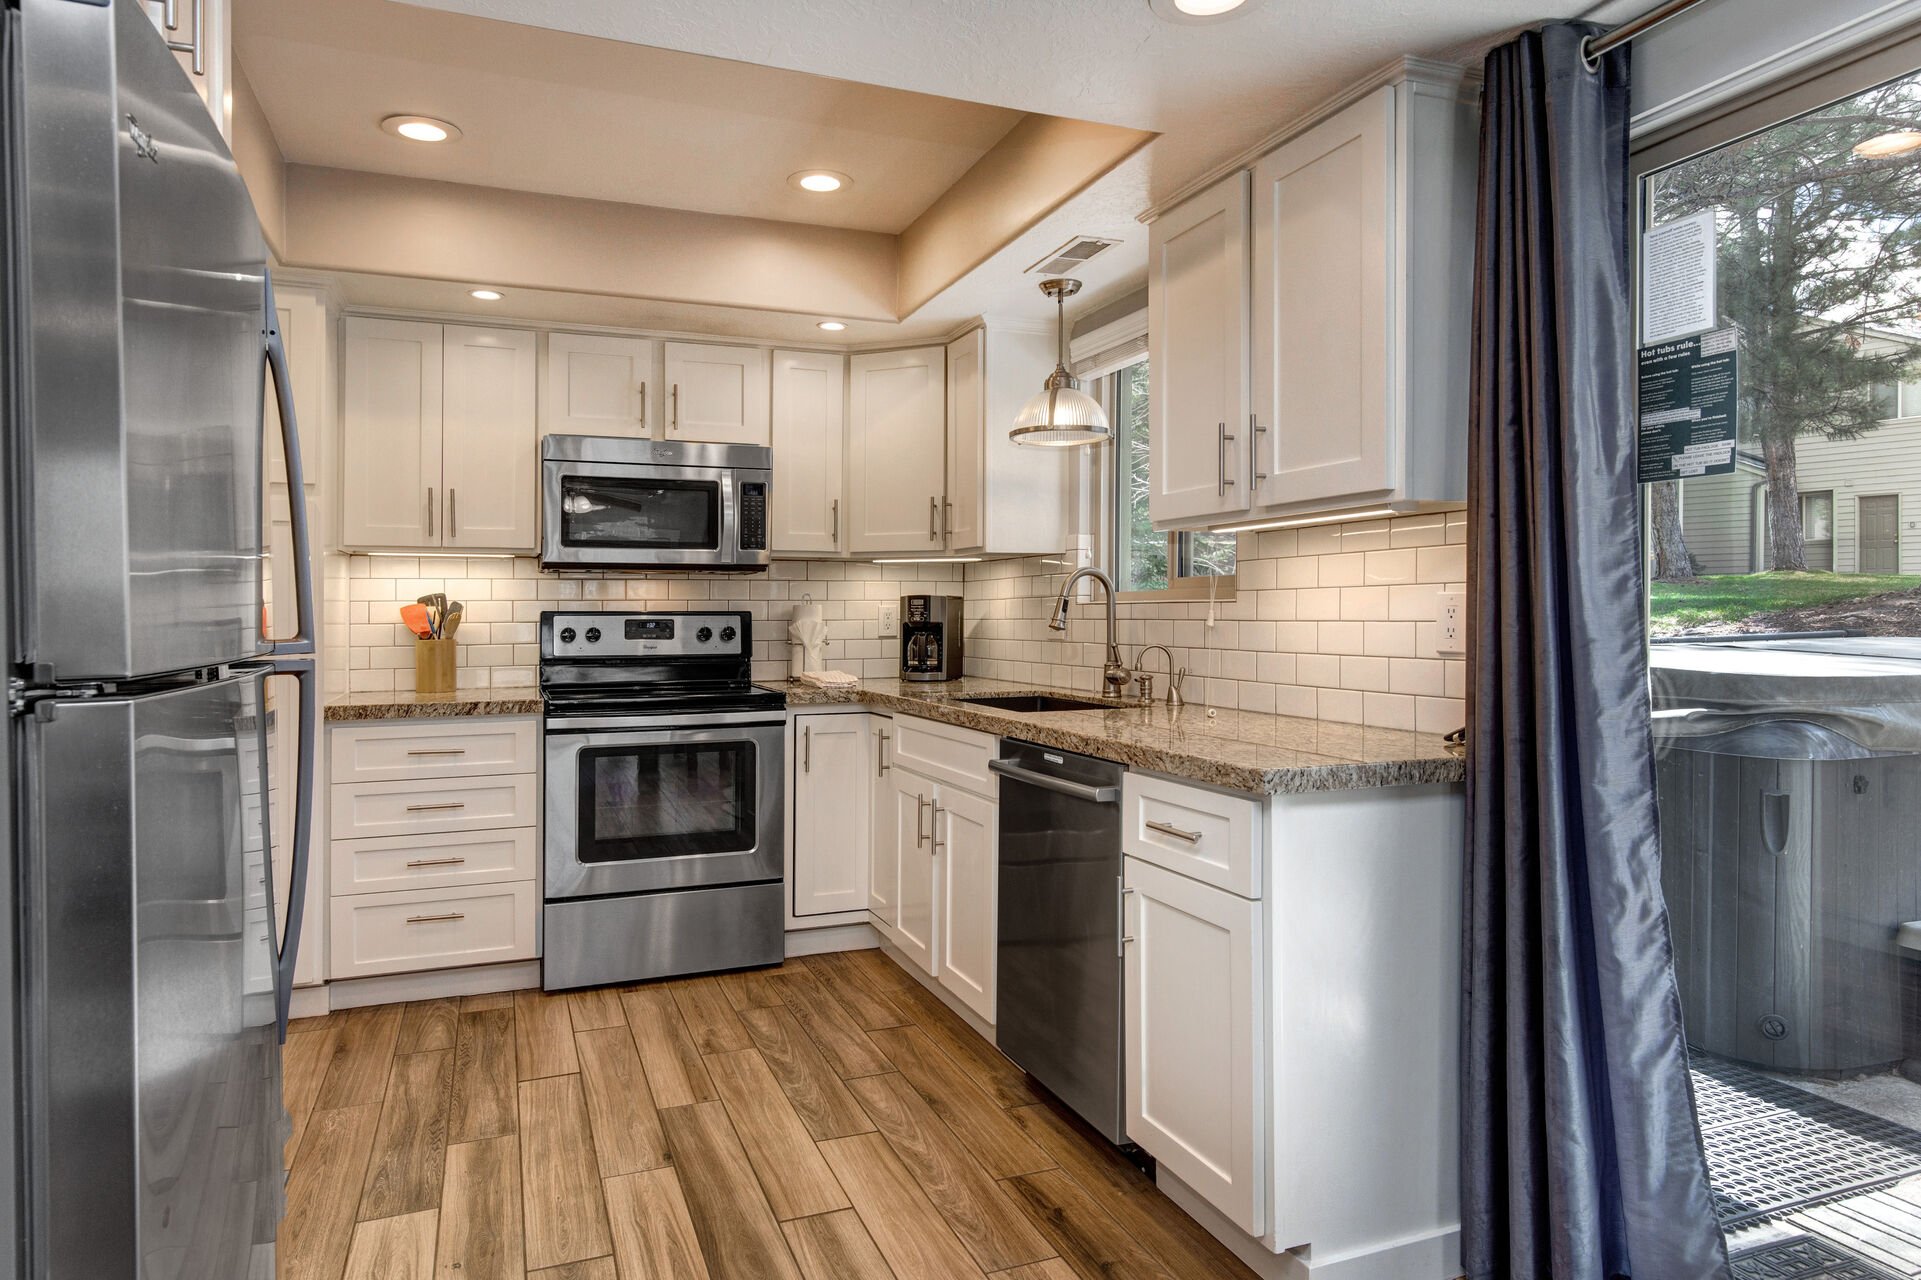 Fully Equipped Kitchen with stone countertops, stainless steel whirlpool appliances, and private patio access